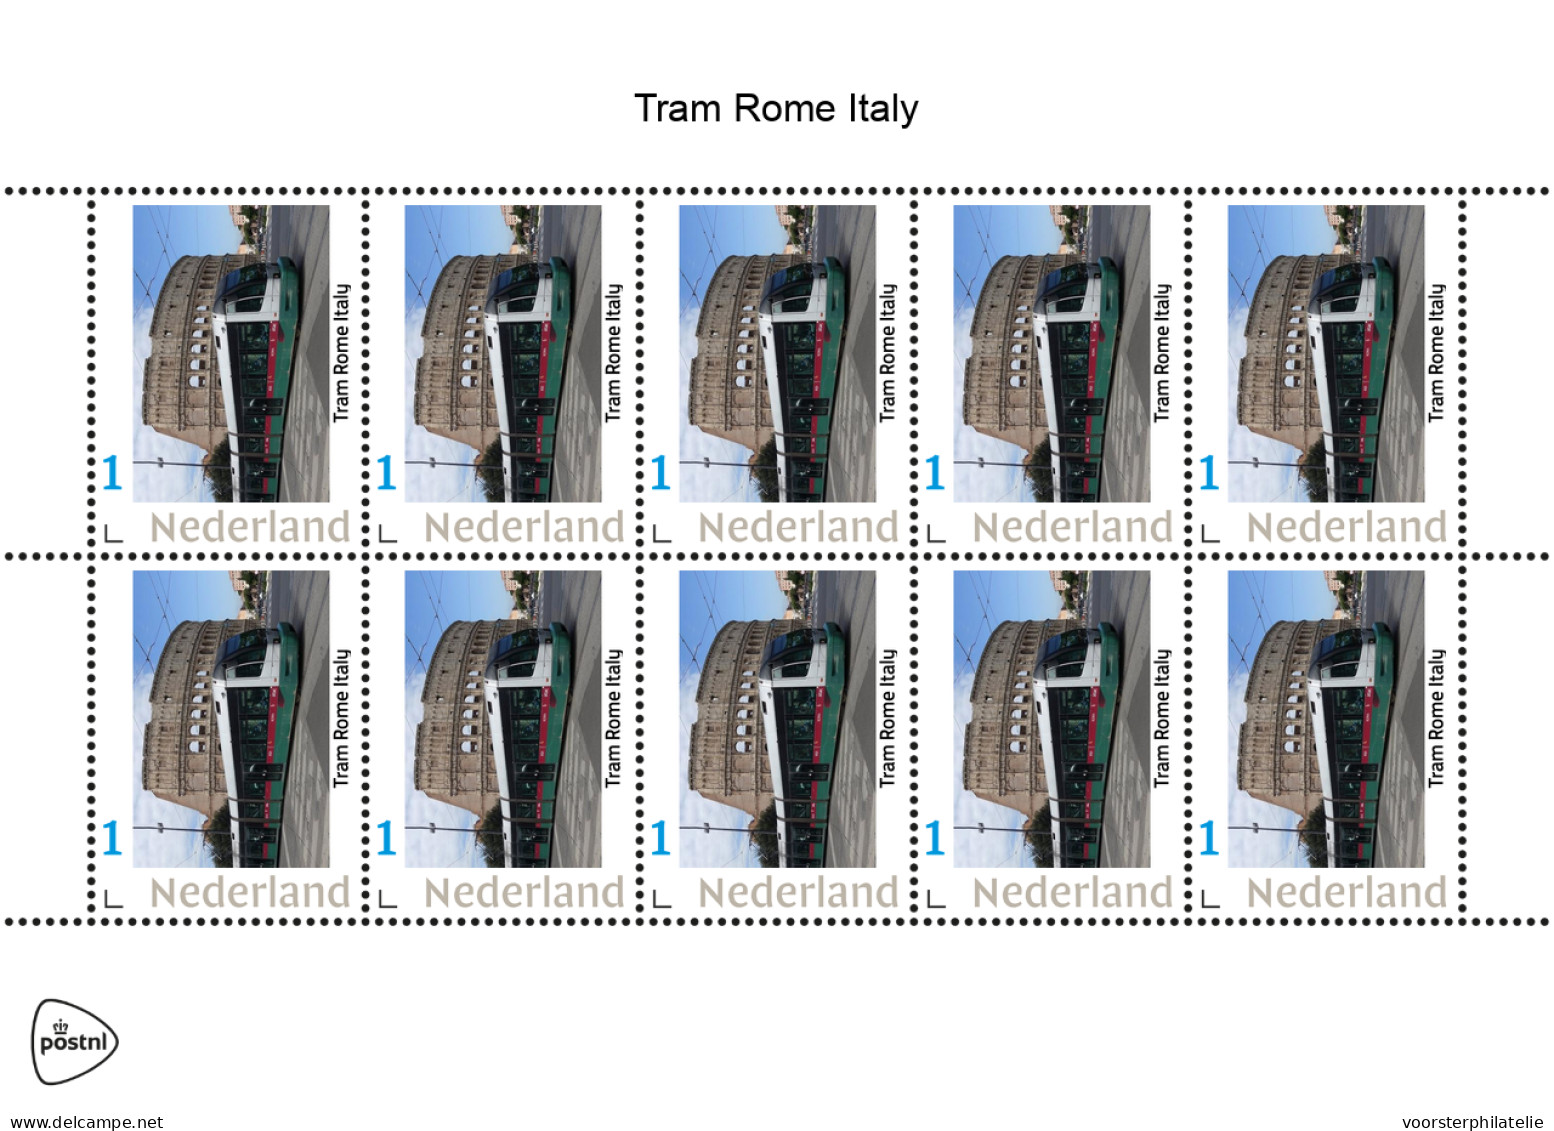 NETHERLANDS PAYS BAS TRAM ROME ITALY - Personnalized Stamps